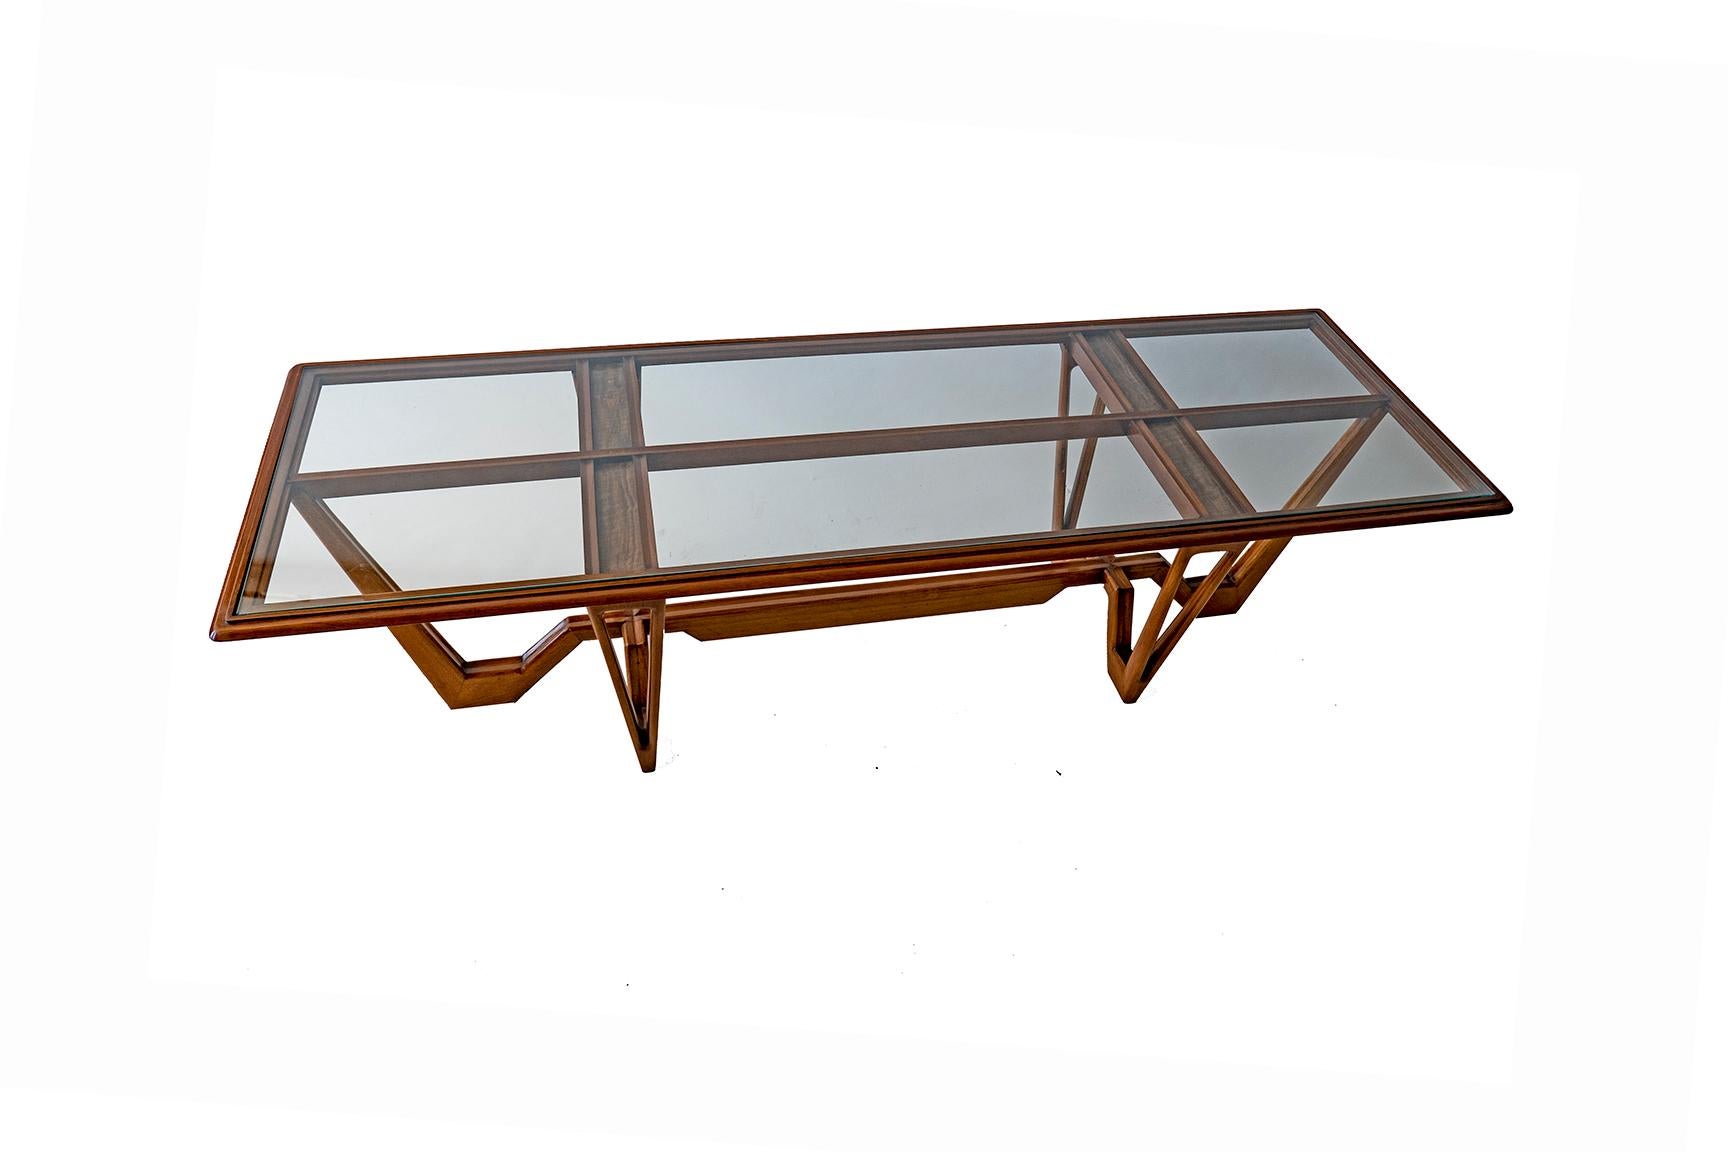 Italian glass and wood coffee table of architectural form.